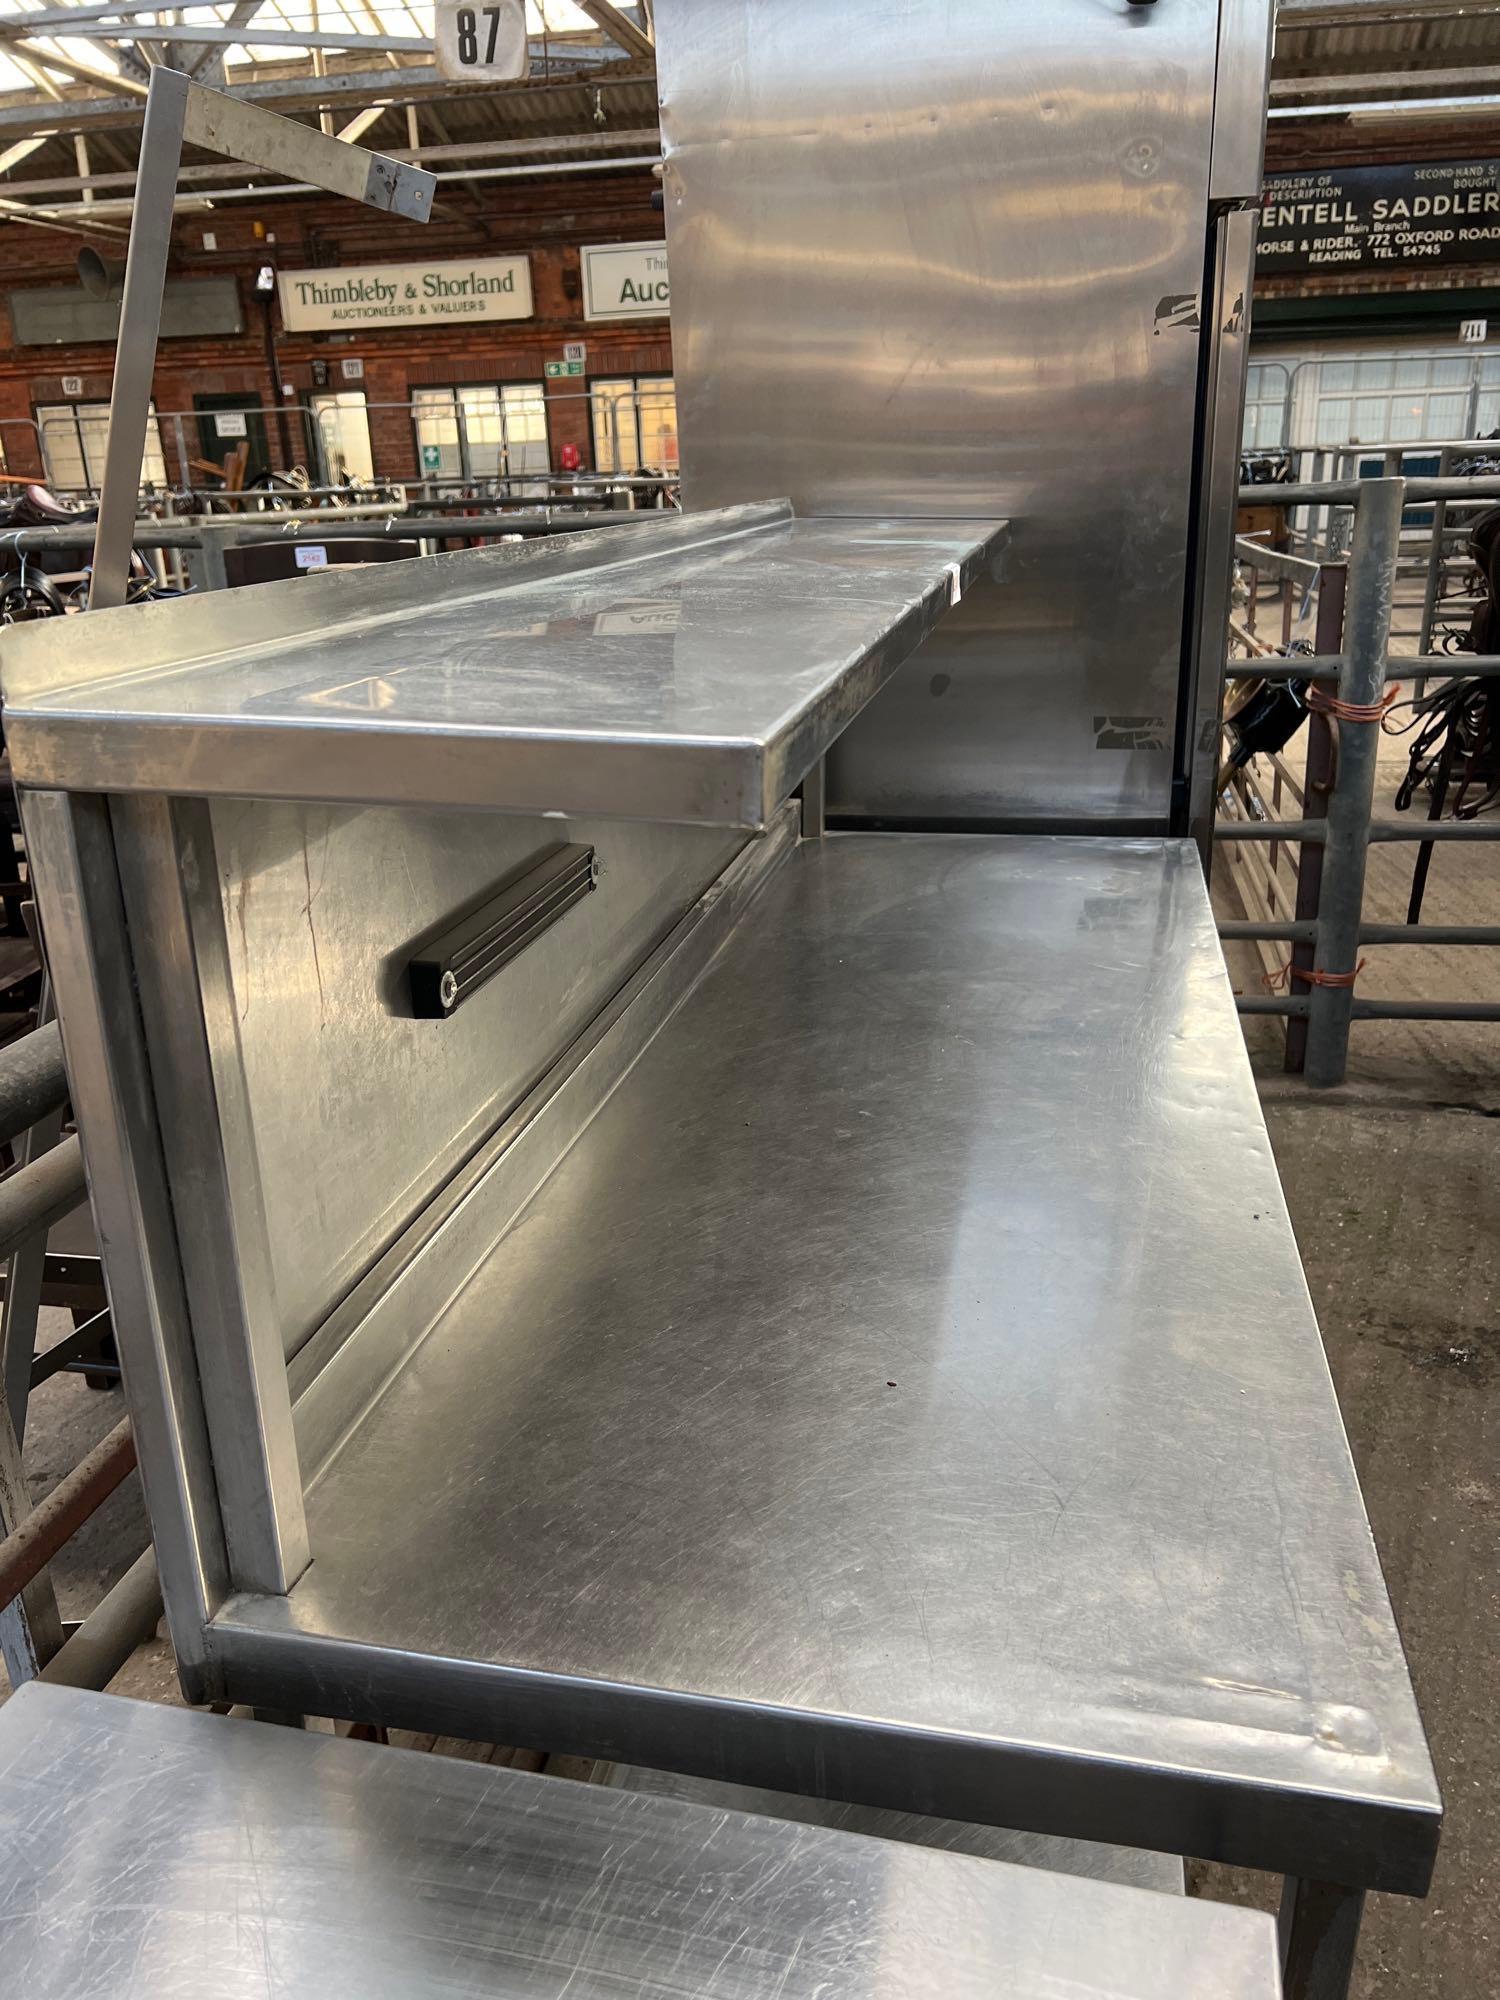 Stainless steel preparation table with over shelf - Image 2 of 2